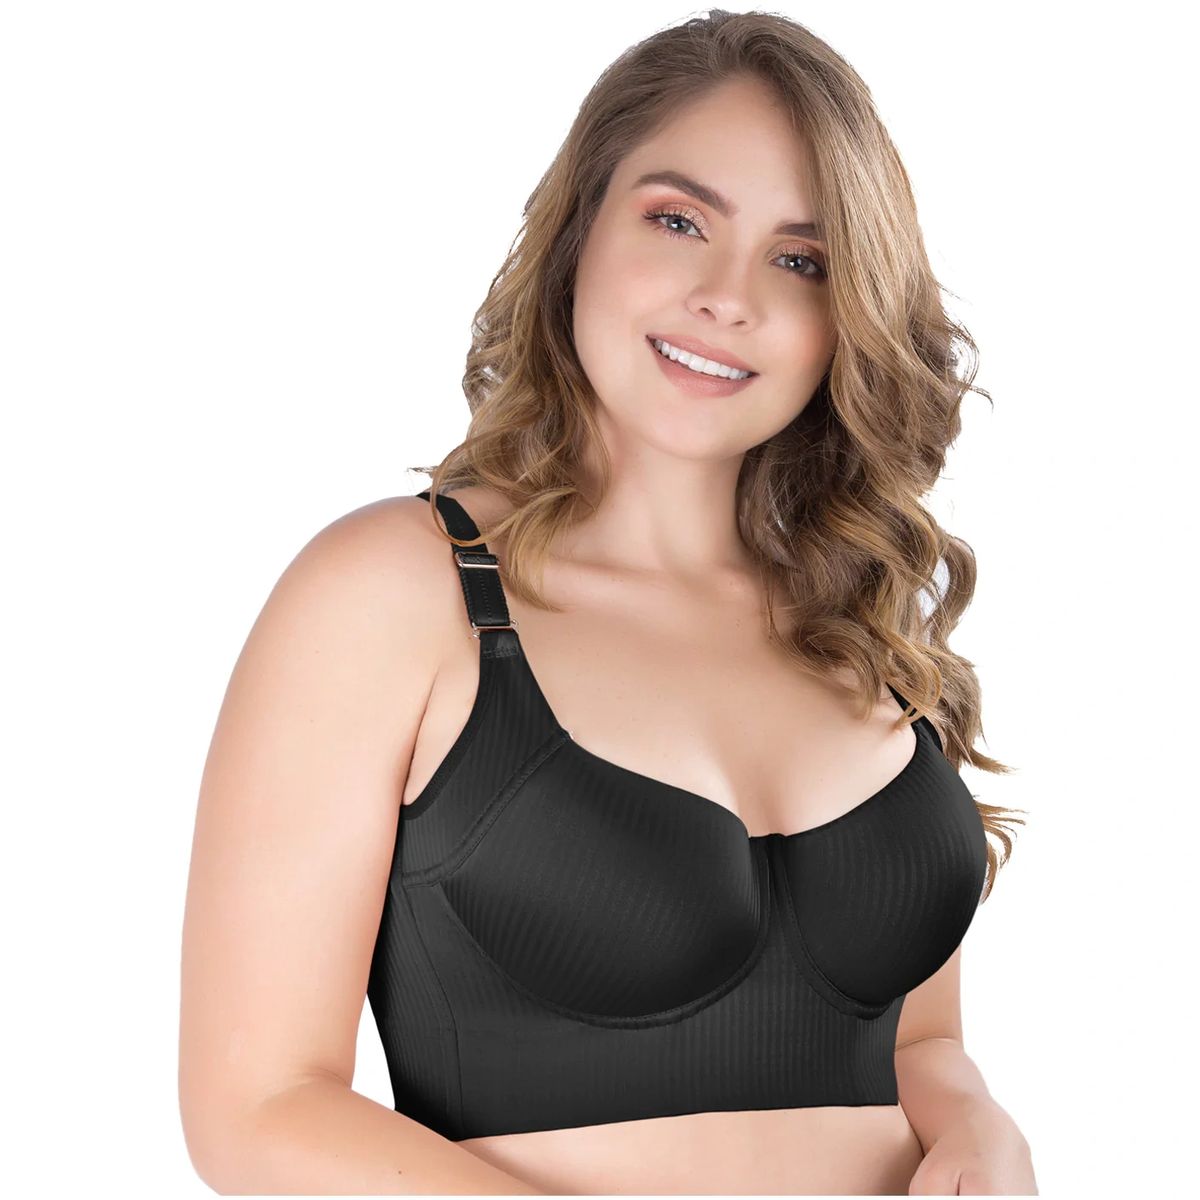 UPLADY 8542 EXTRA FIRM CONTROL FULL CUP BRA WITH SIDE SUPPORT